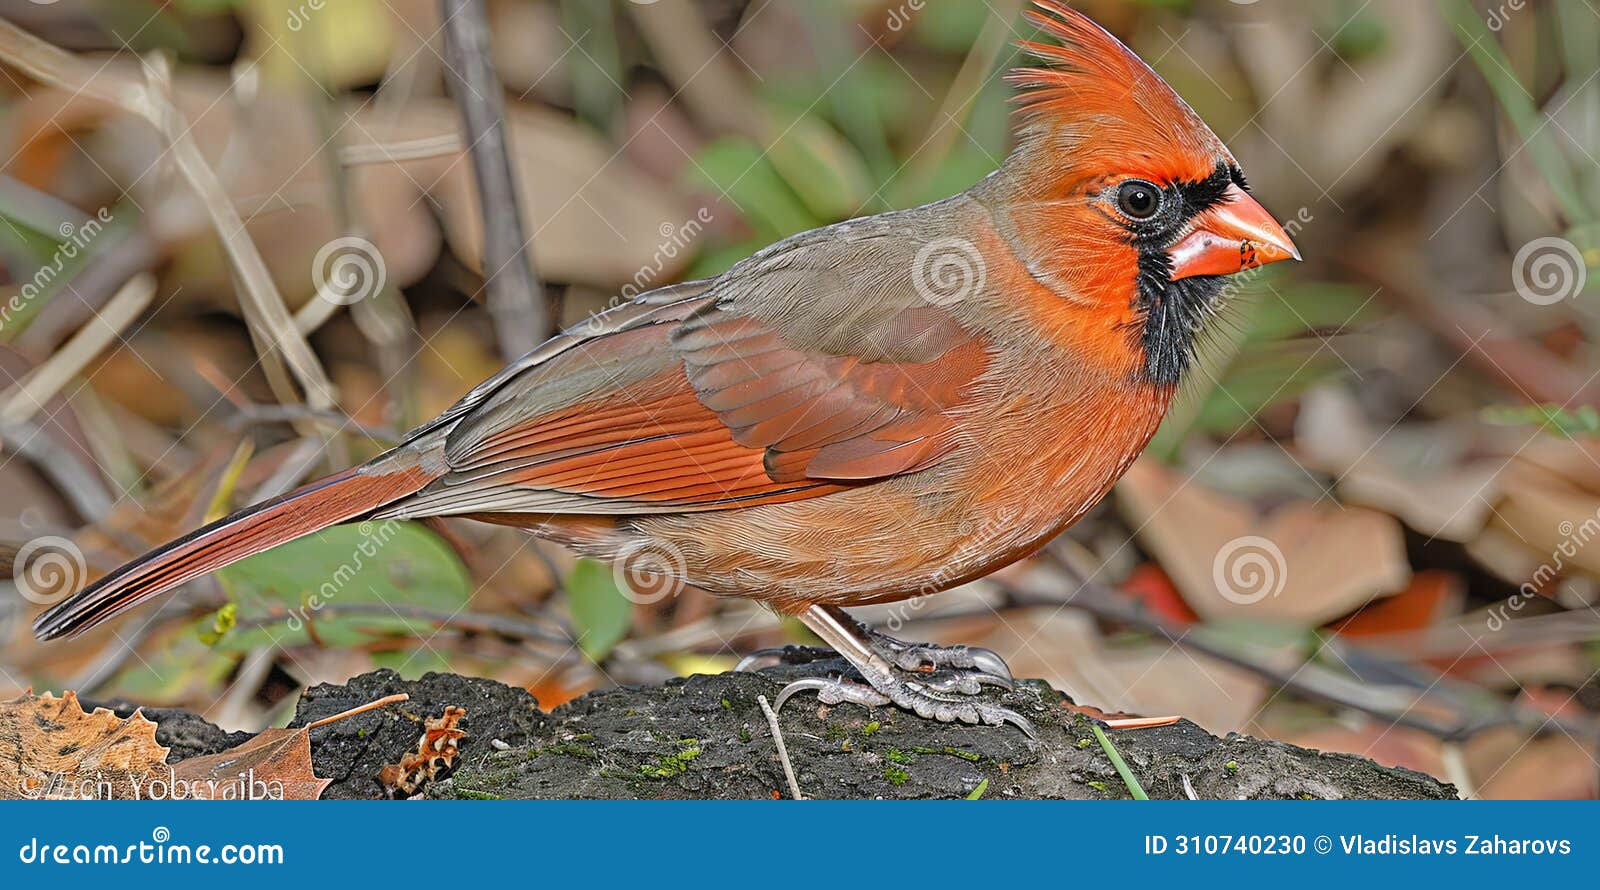 a cardinal sitting on a tree branch, delighting the eye with his bright red pluma